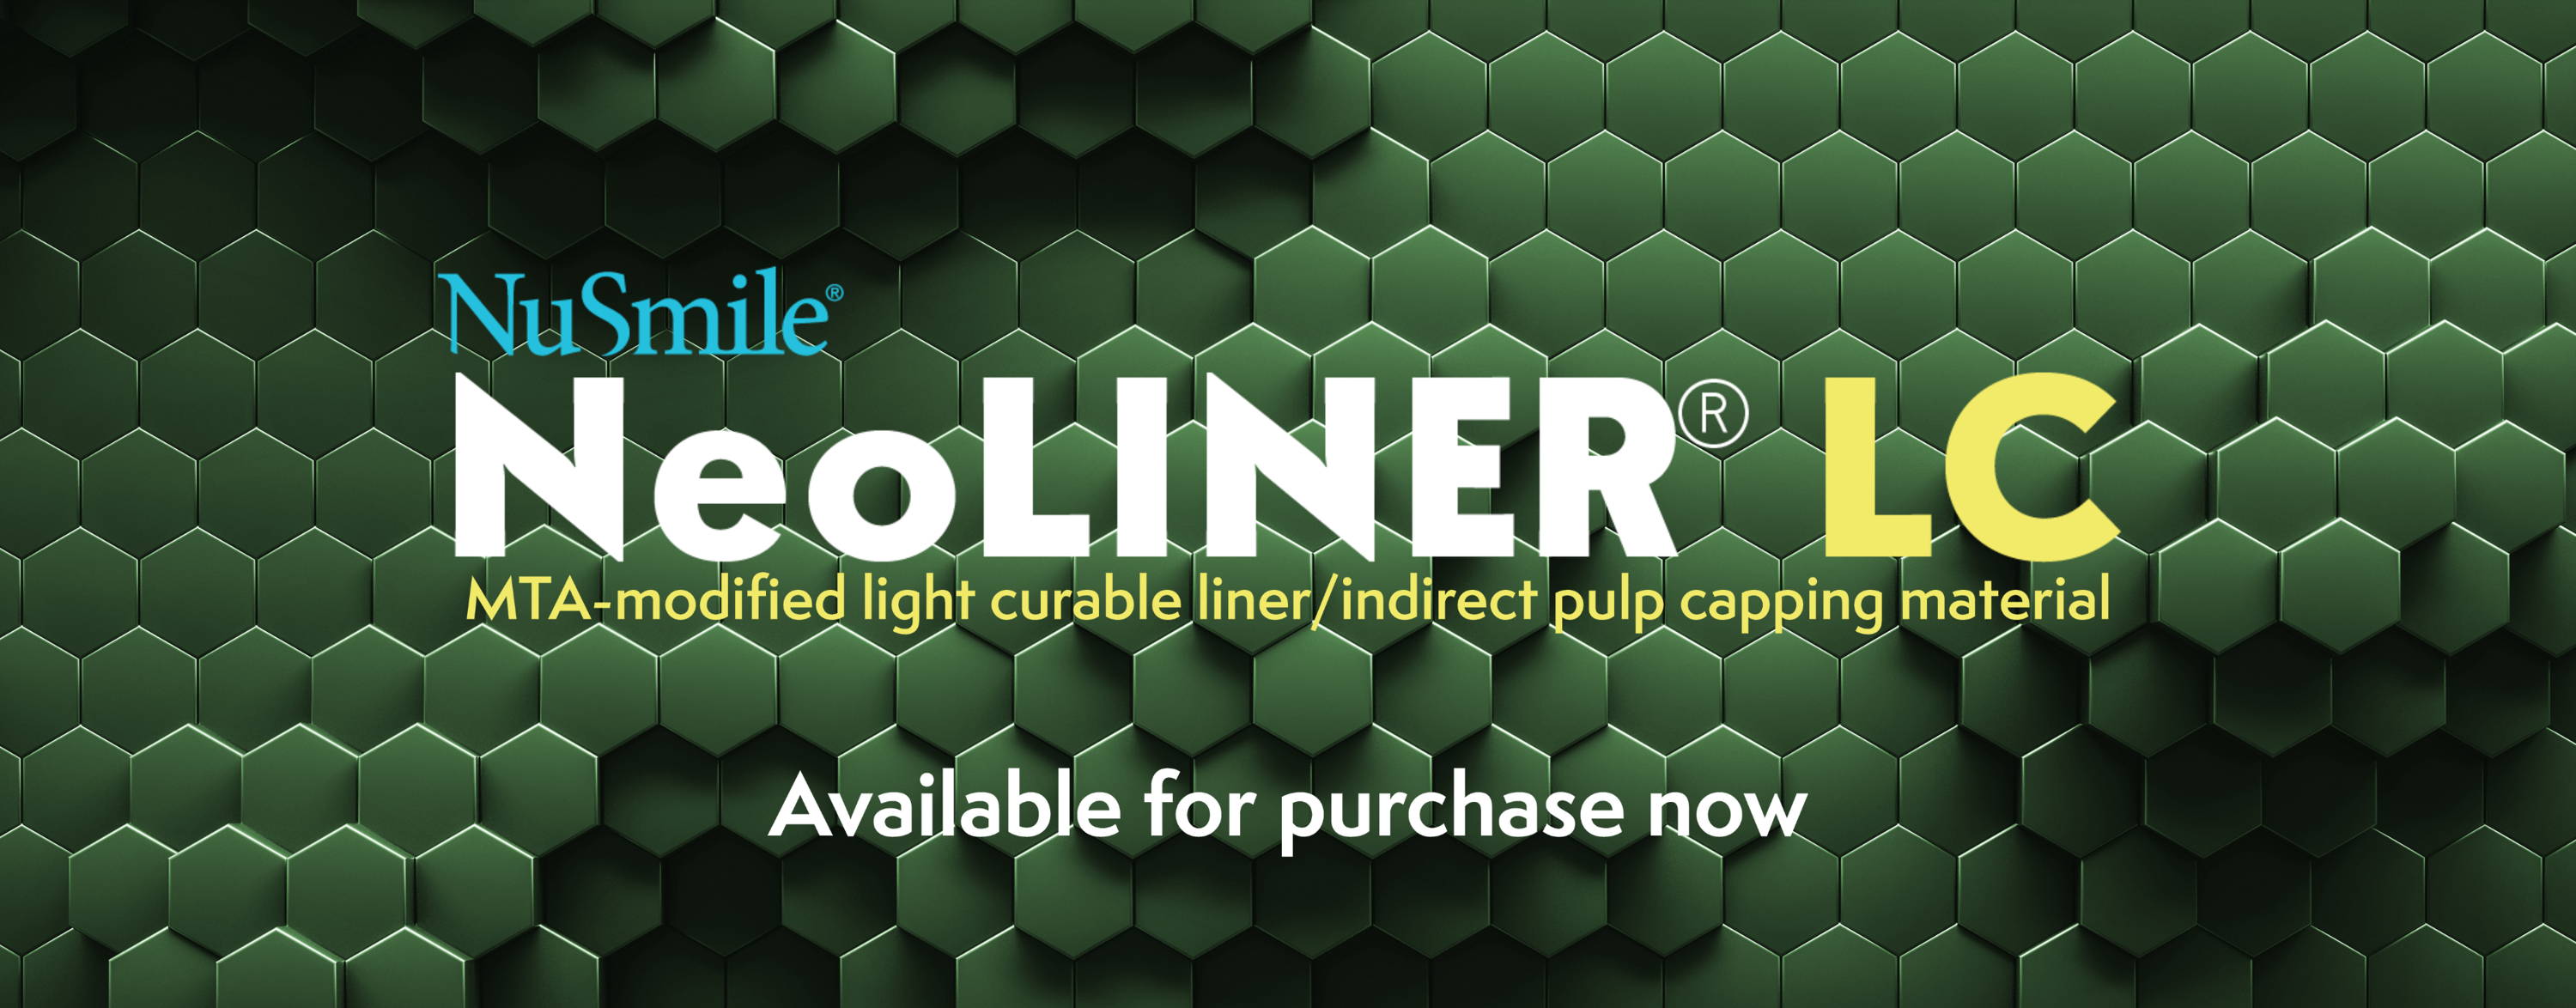 NeoLiner LC MTA-modified light curable liner